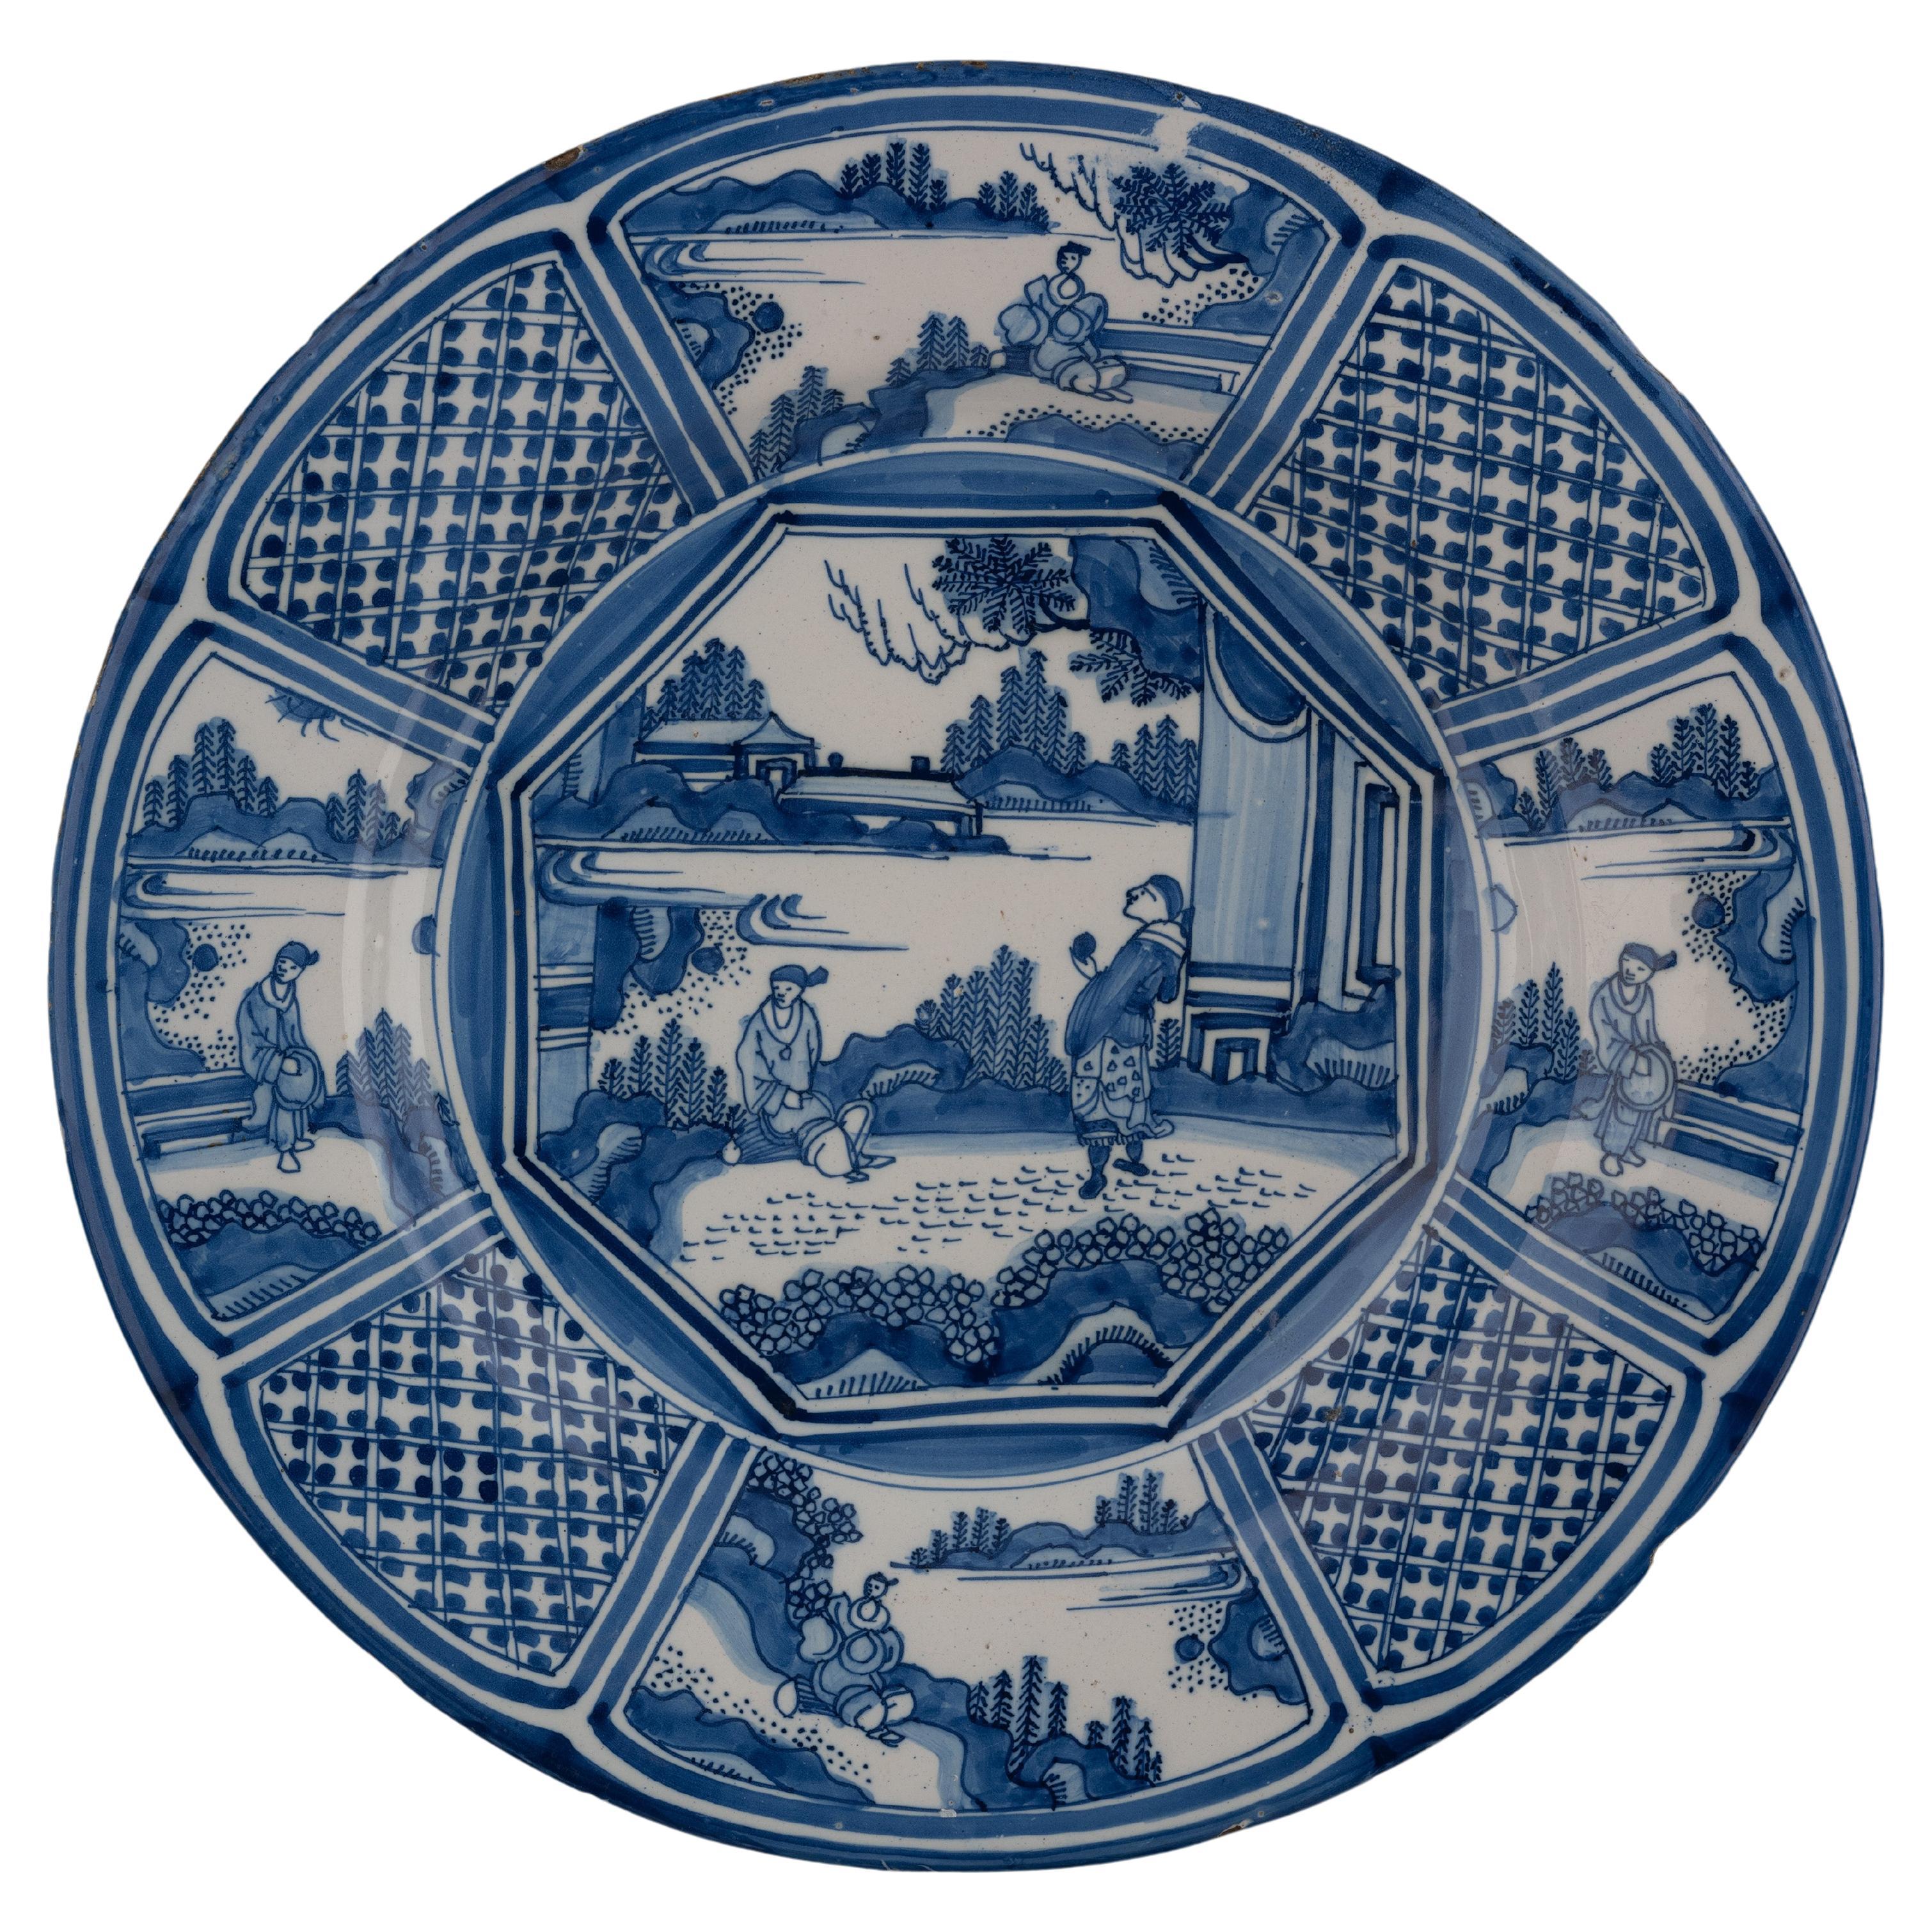 Large Blue and White Chinoiserie Dish Delft, 1650-1680 Chinese Figures